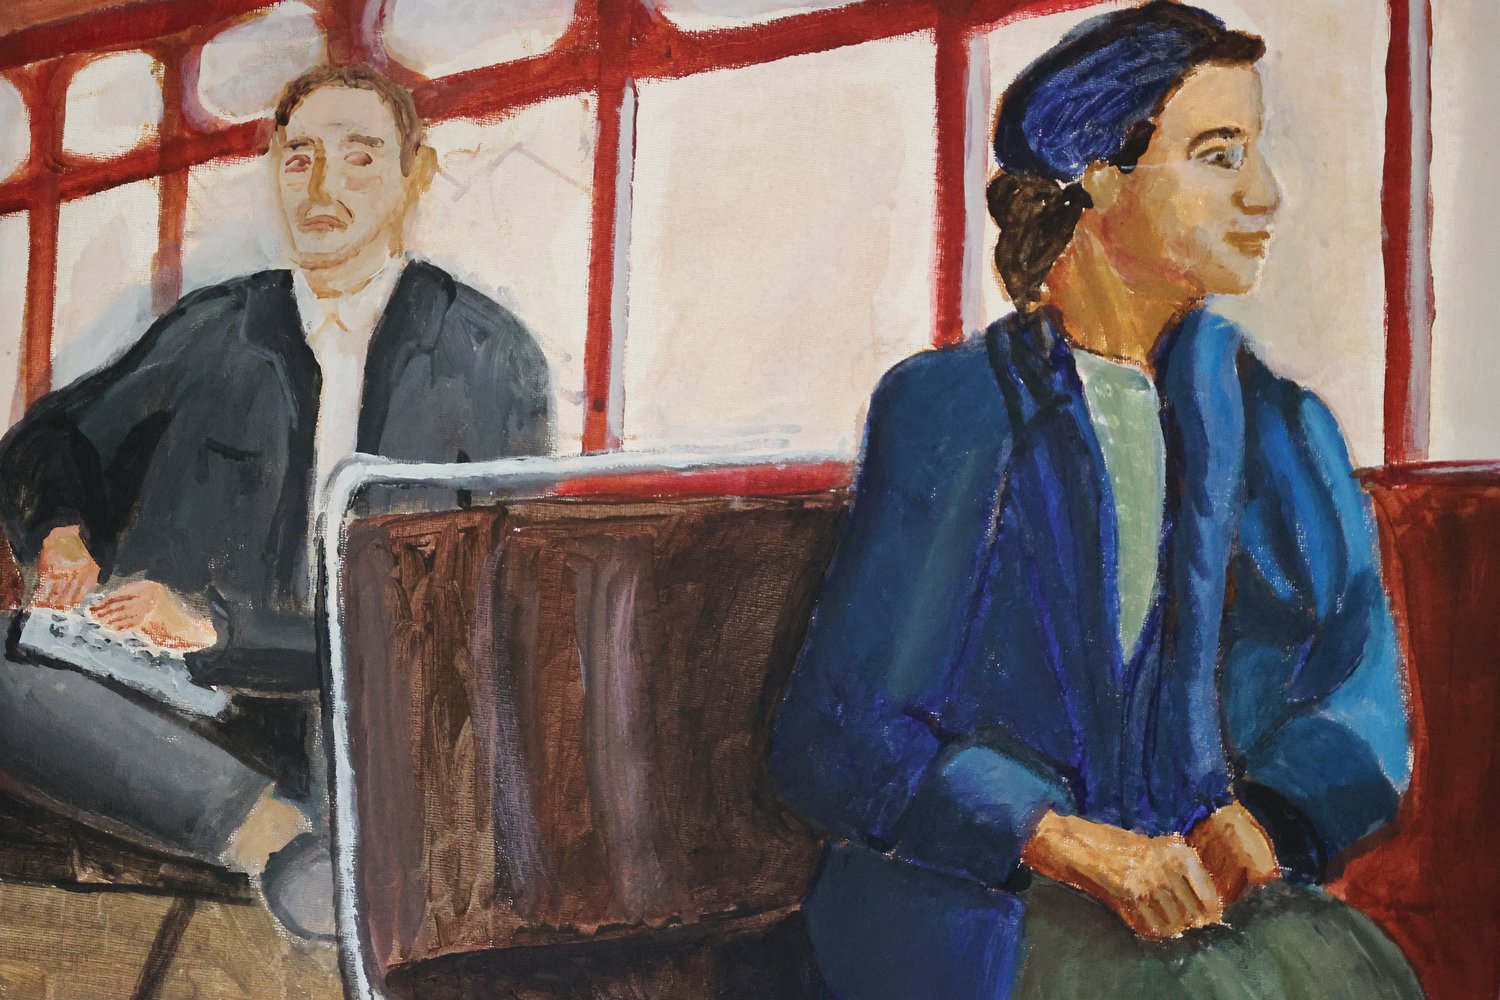 A painting of Rosa Parks refusing to give up her seat on a bus.